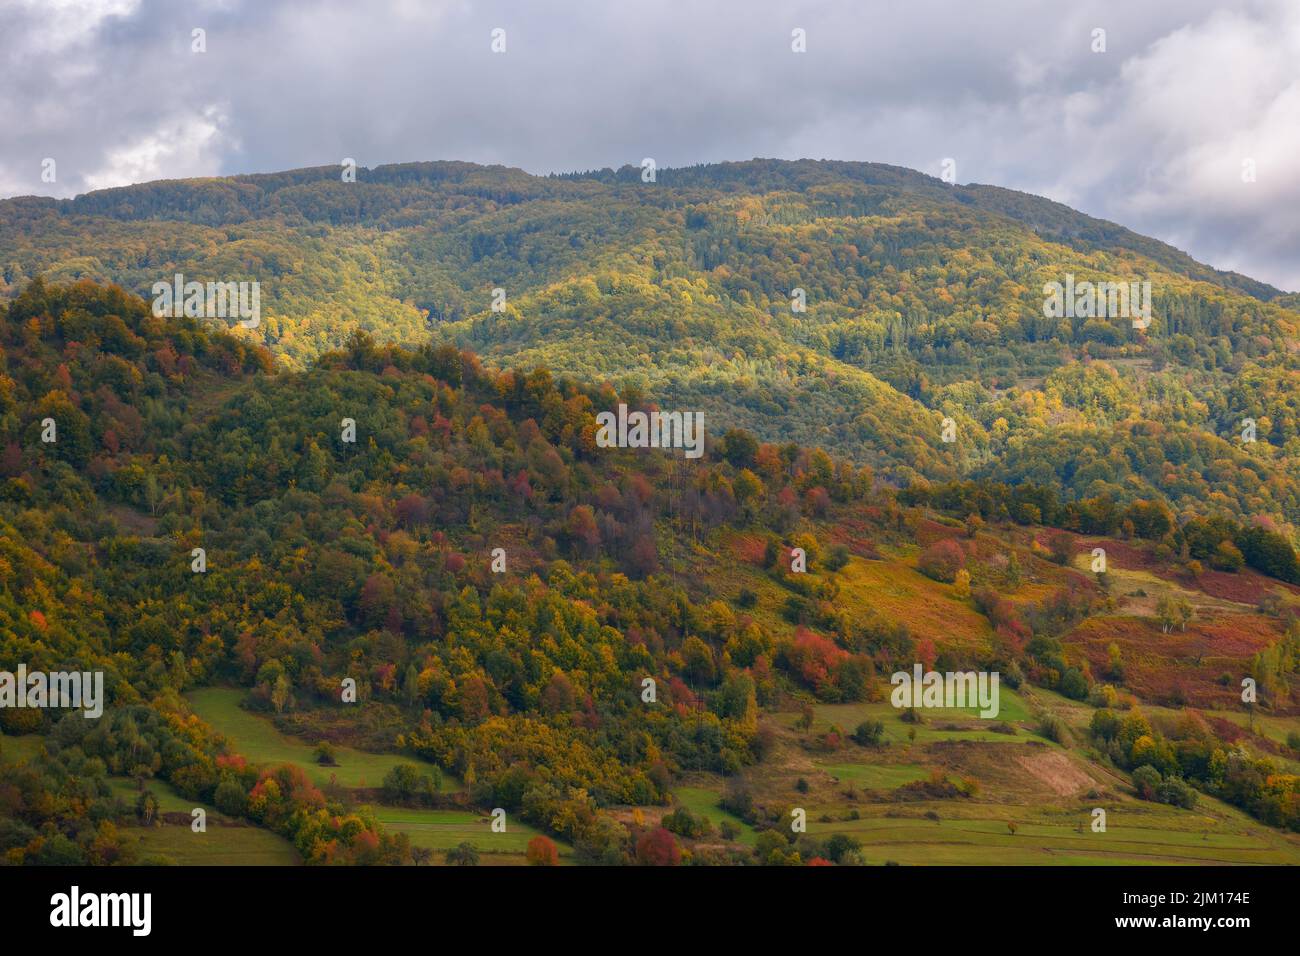 mountainous carpathian countryside in autumn. forest in fall foliage and rural fields on steep hills. beauty of colorful outdoor nature scenery in dap Stock Photo